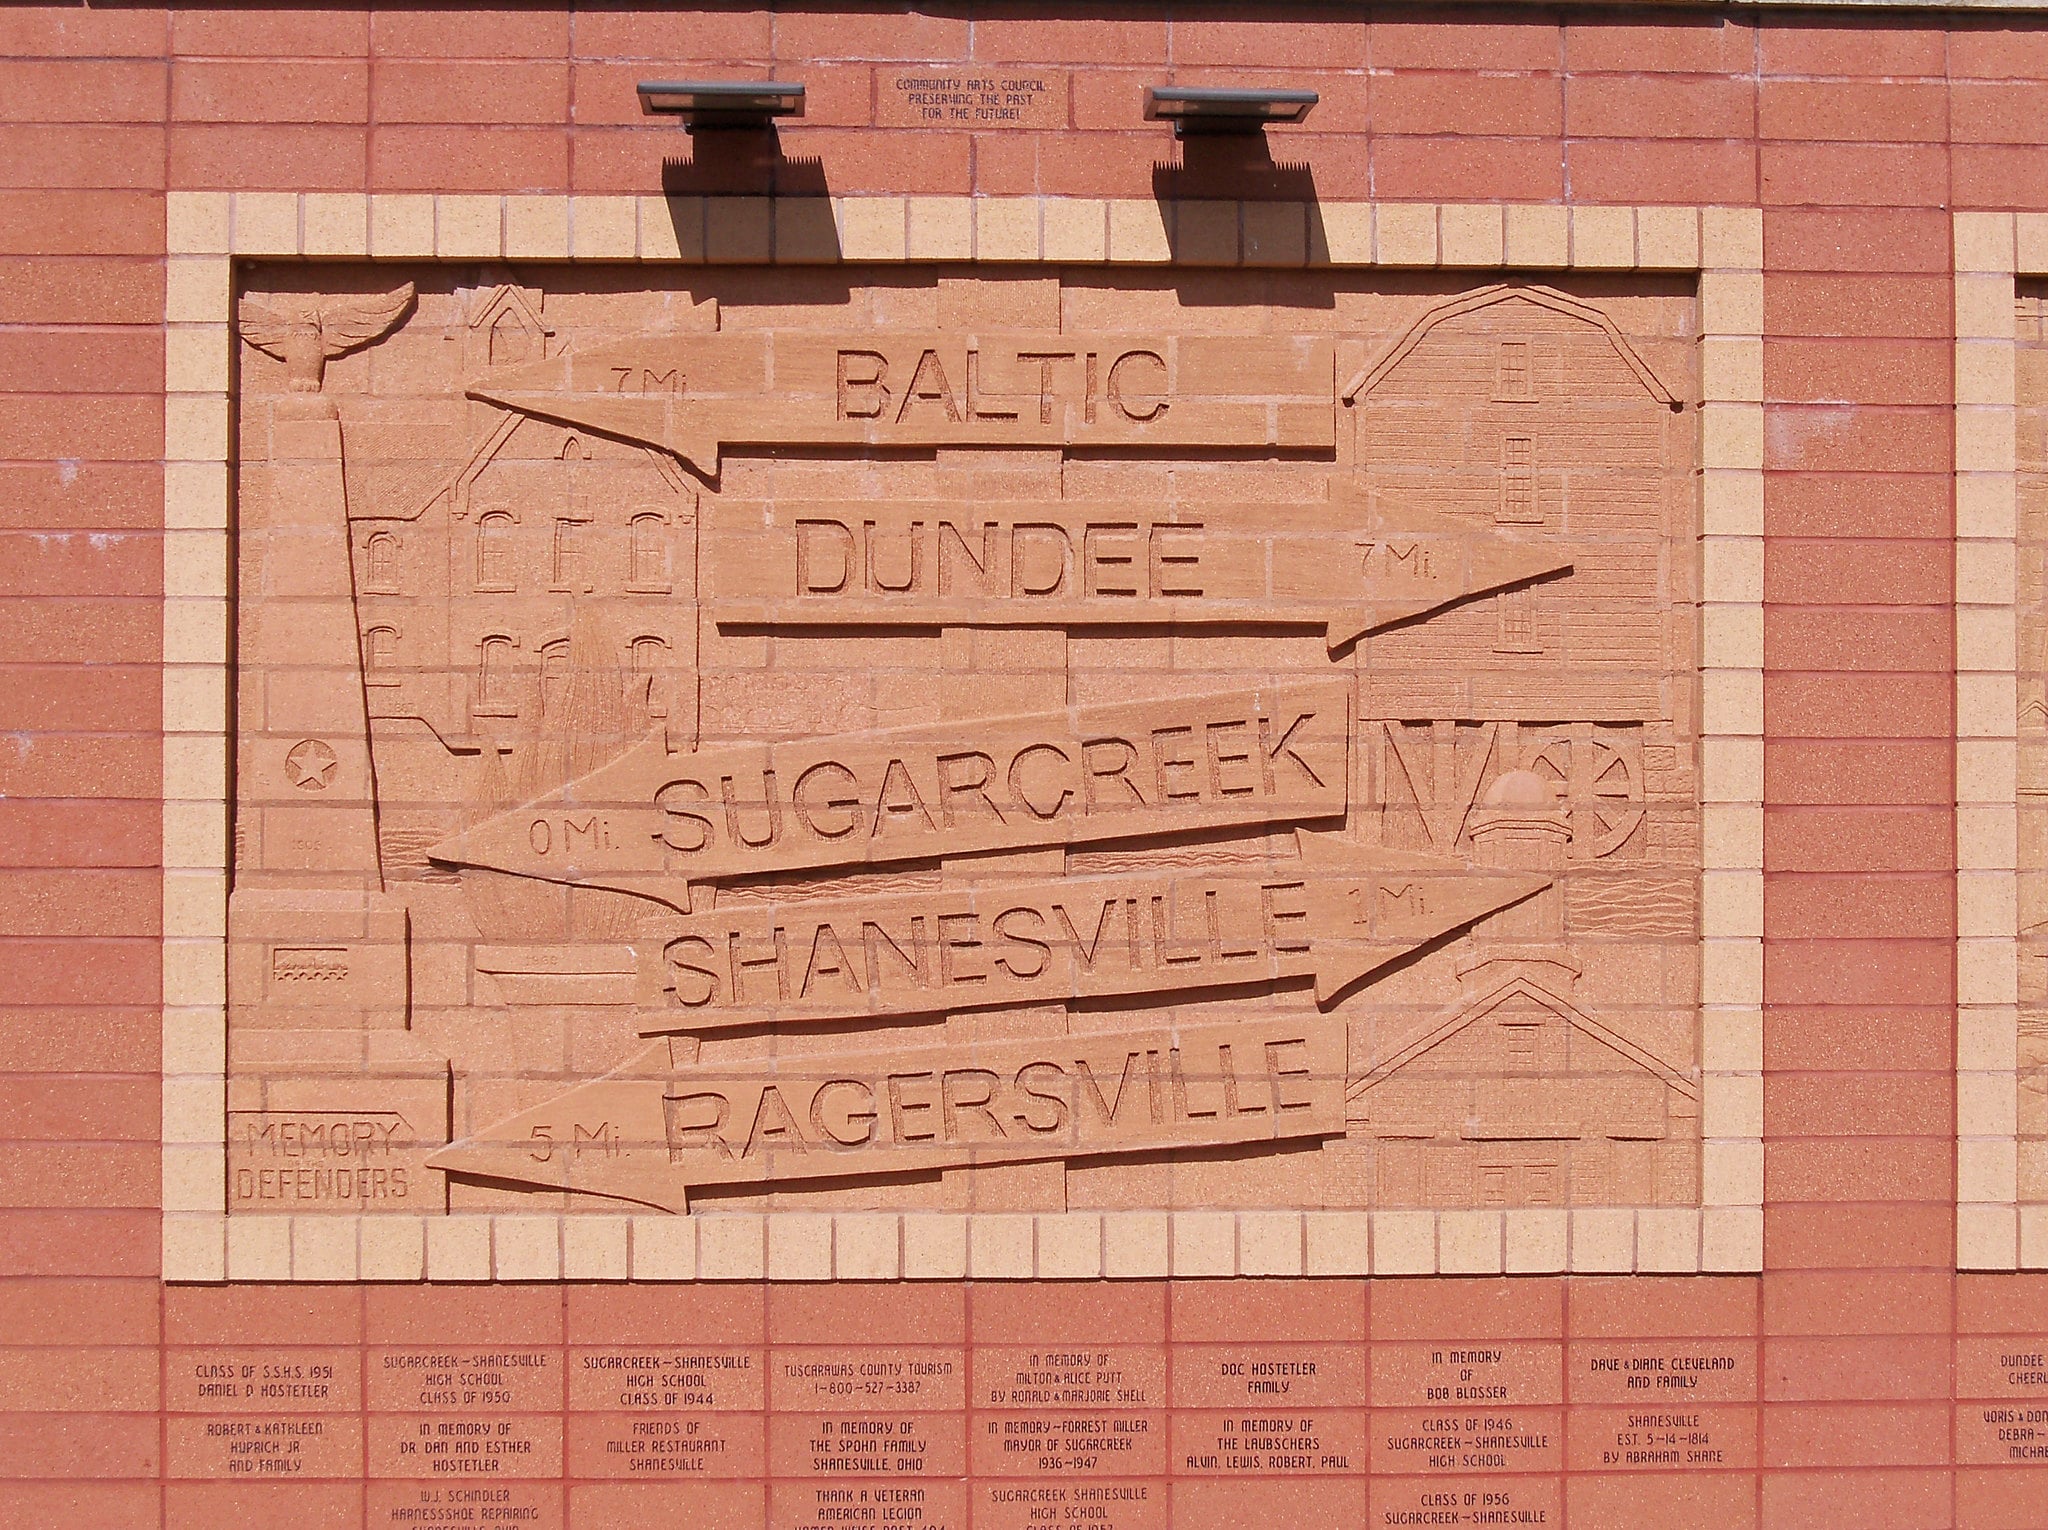 horizontal photo of one of the portions of the brick wall sculpture in sugarcreek. 5 directional arrows point to: baltic 7 miles, dundee 7 miles, sugarcreek 0 miles, shanesville 1 mile and ragersville 5 miles